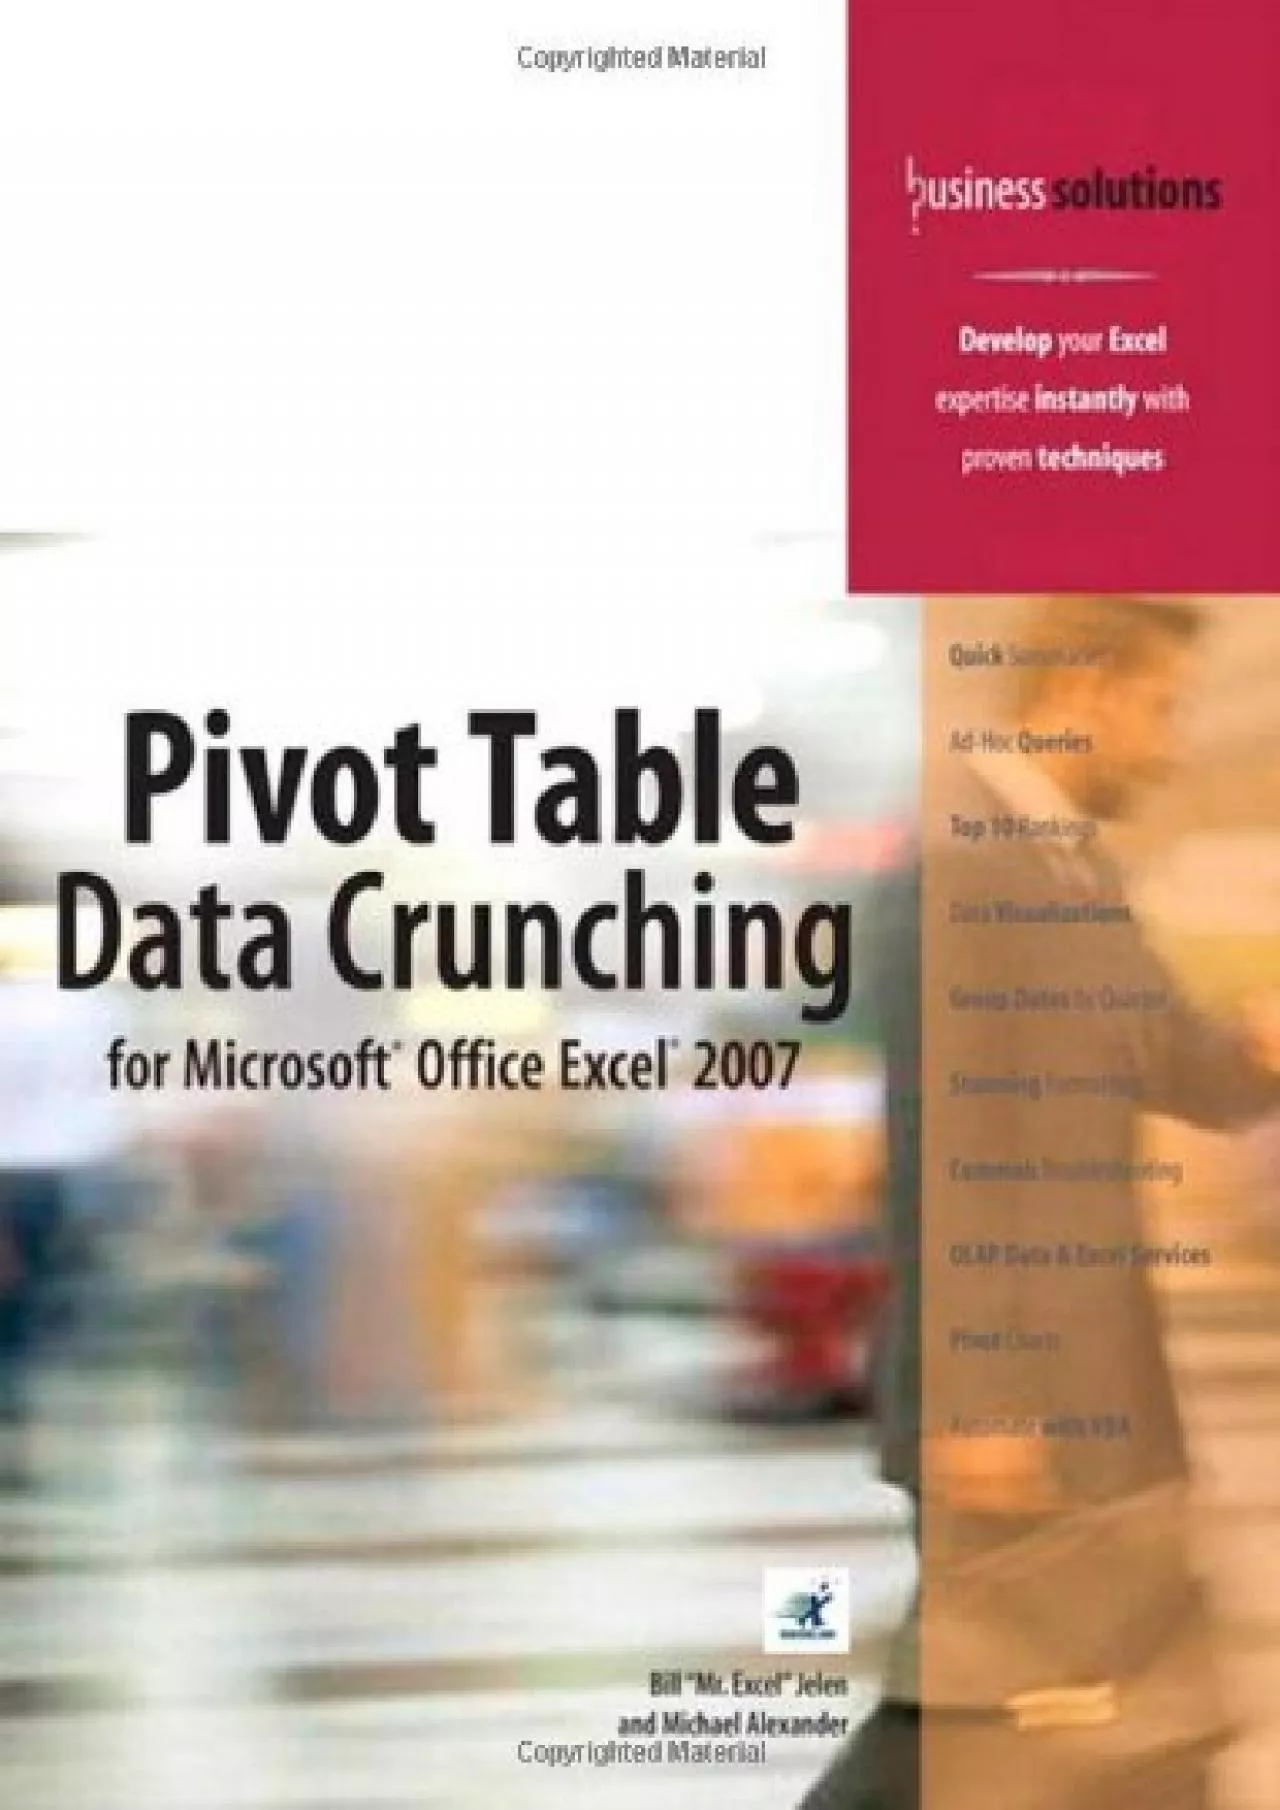 (BOOK)-Pivot Table Data Crunching for Microsoft Office Excel 2007